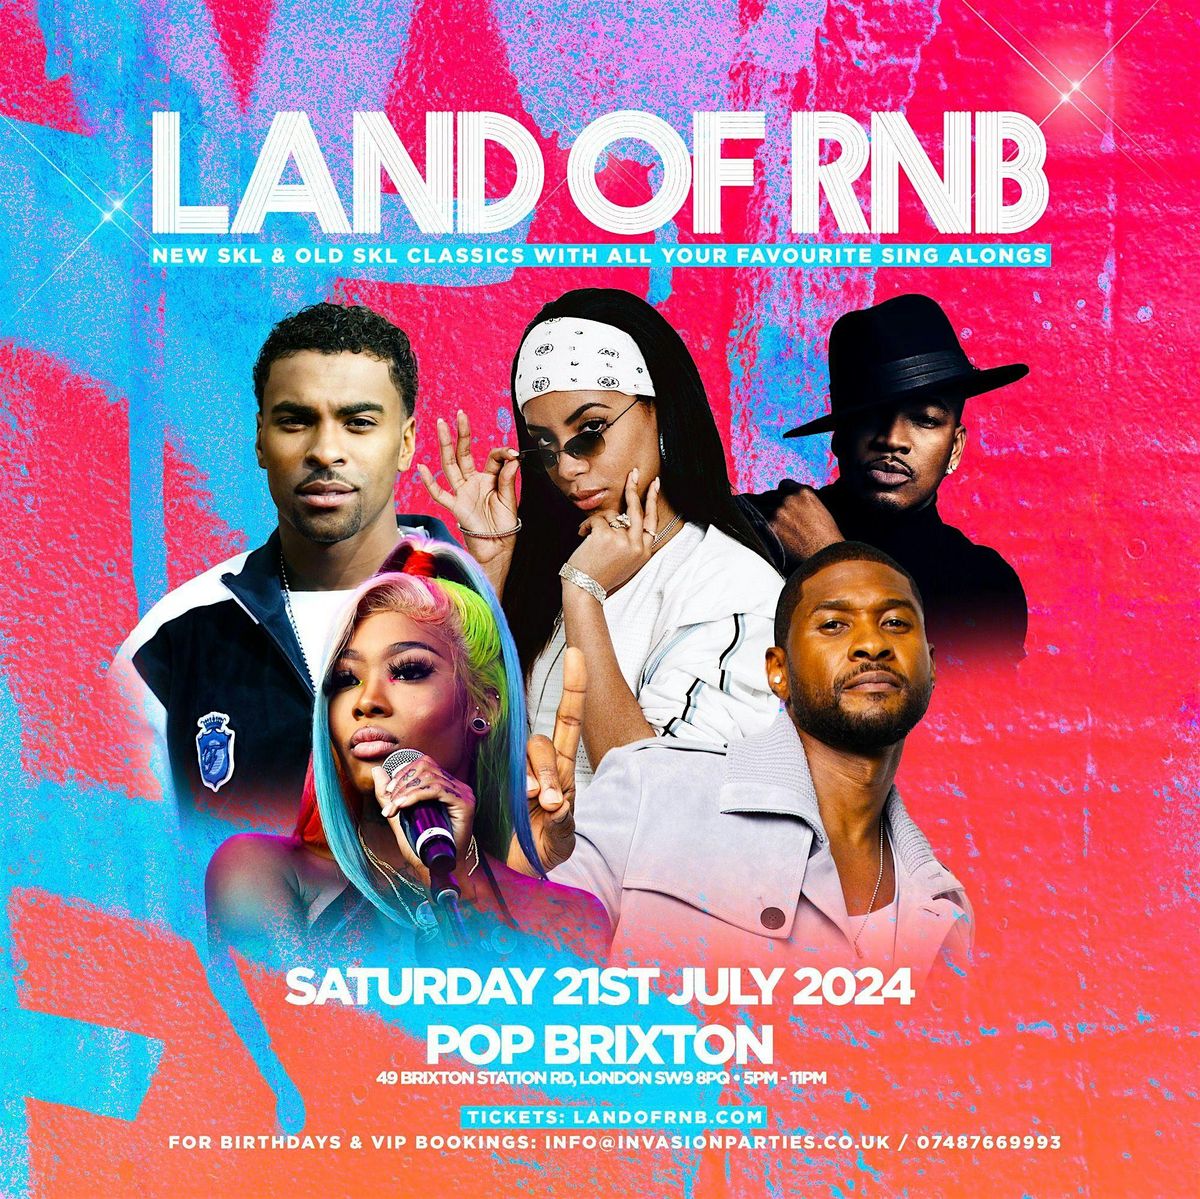 LAND OF RNB - New & Old Skl Rnb & Slow Jams Day Party